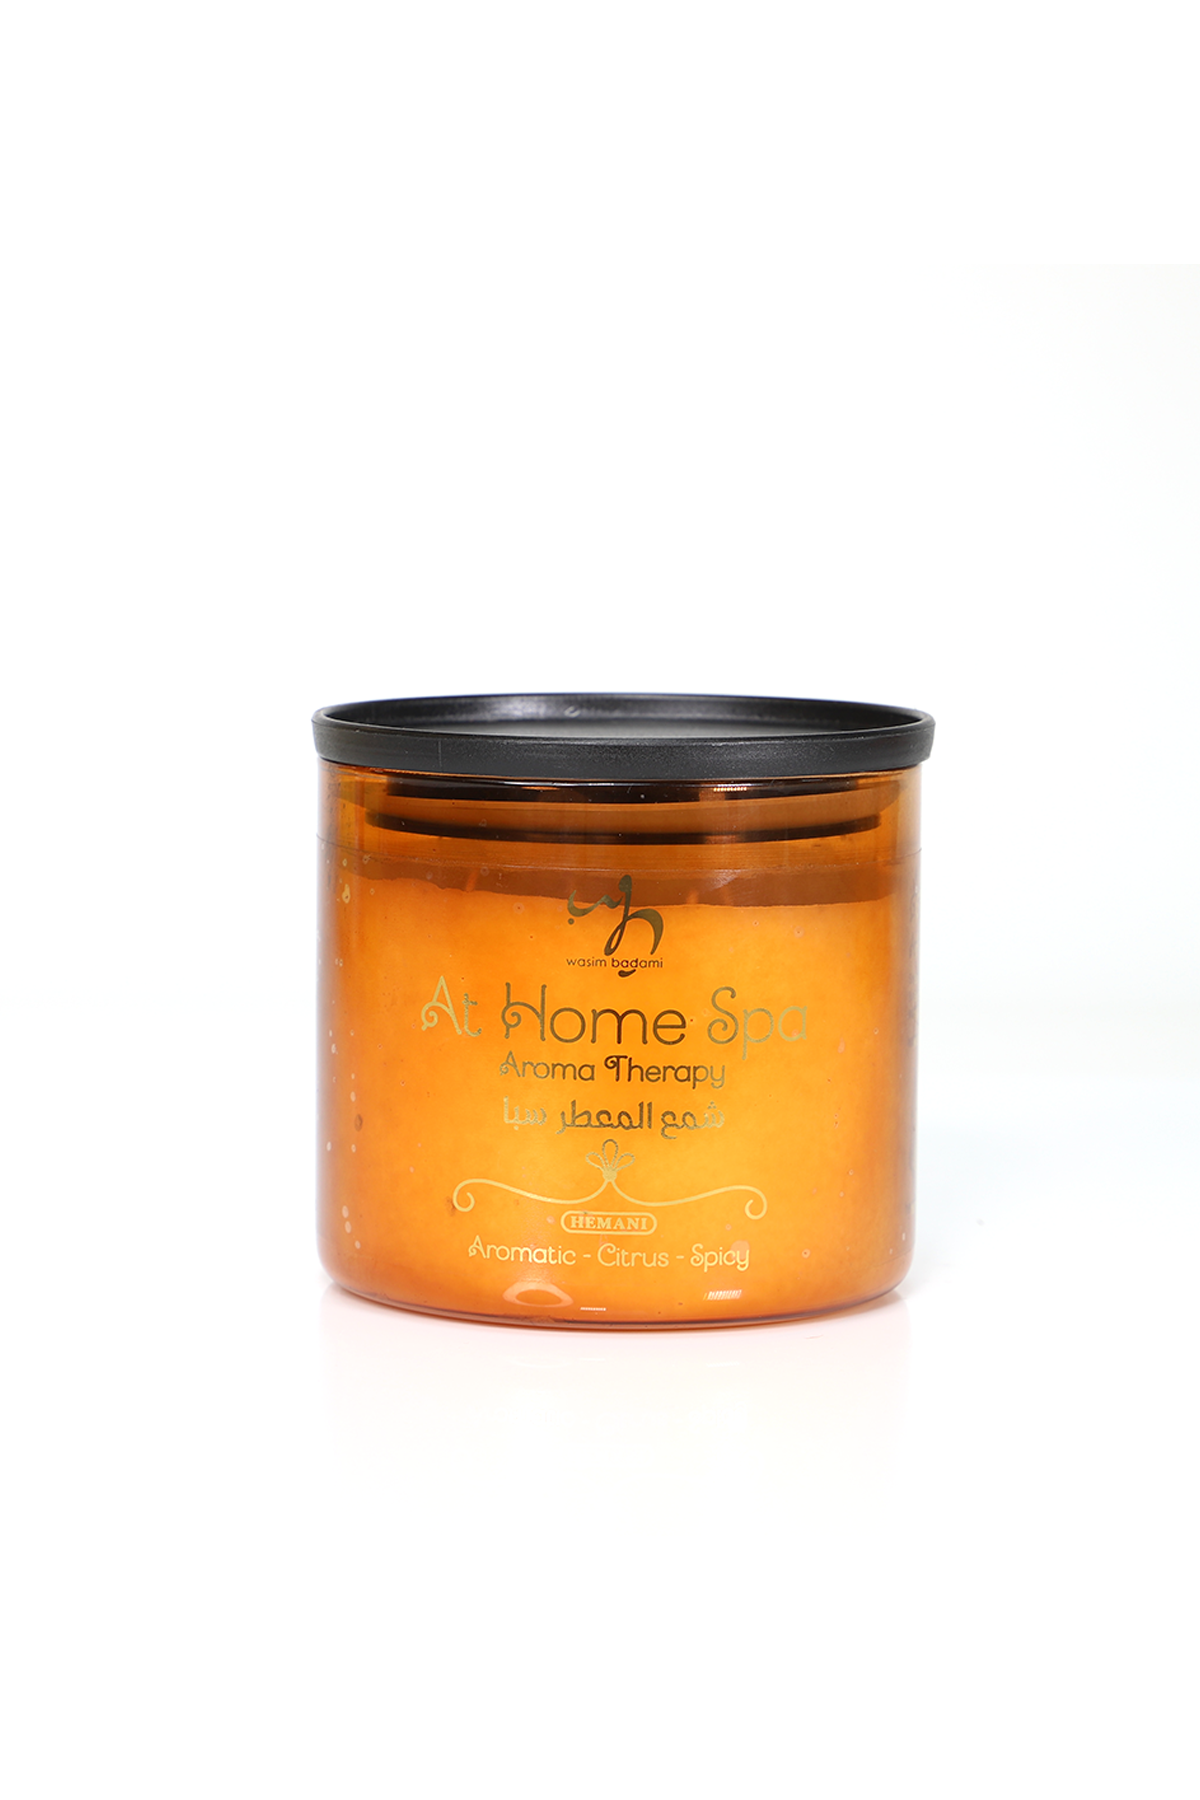 At Home Spa Aroma Therapy 500Gm